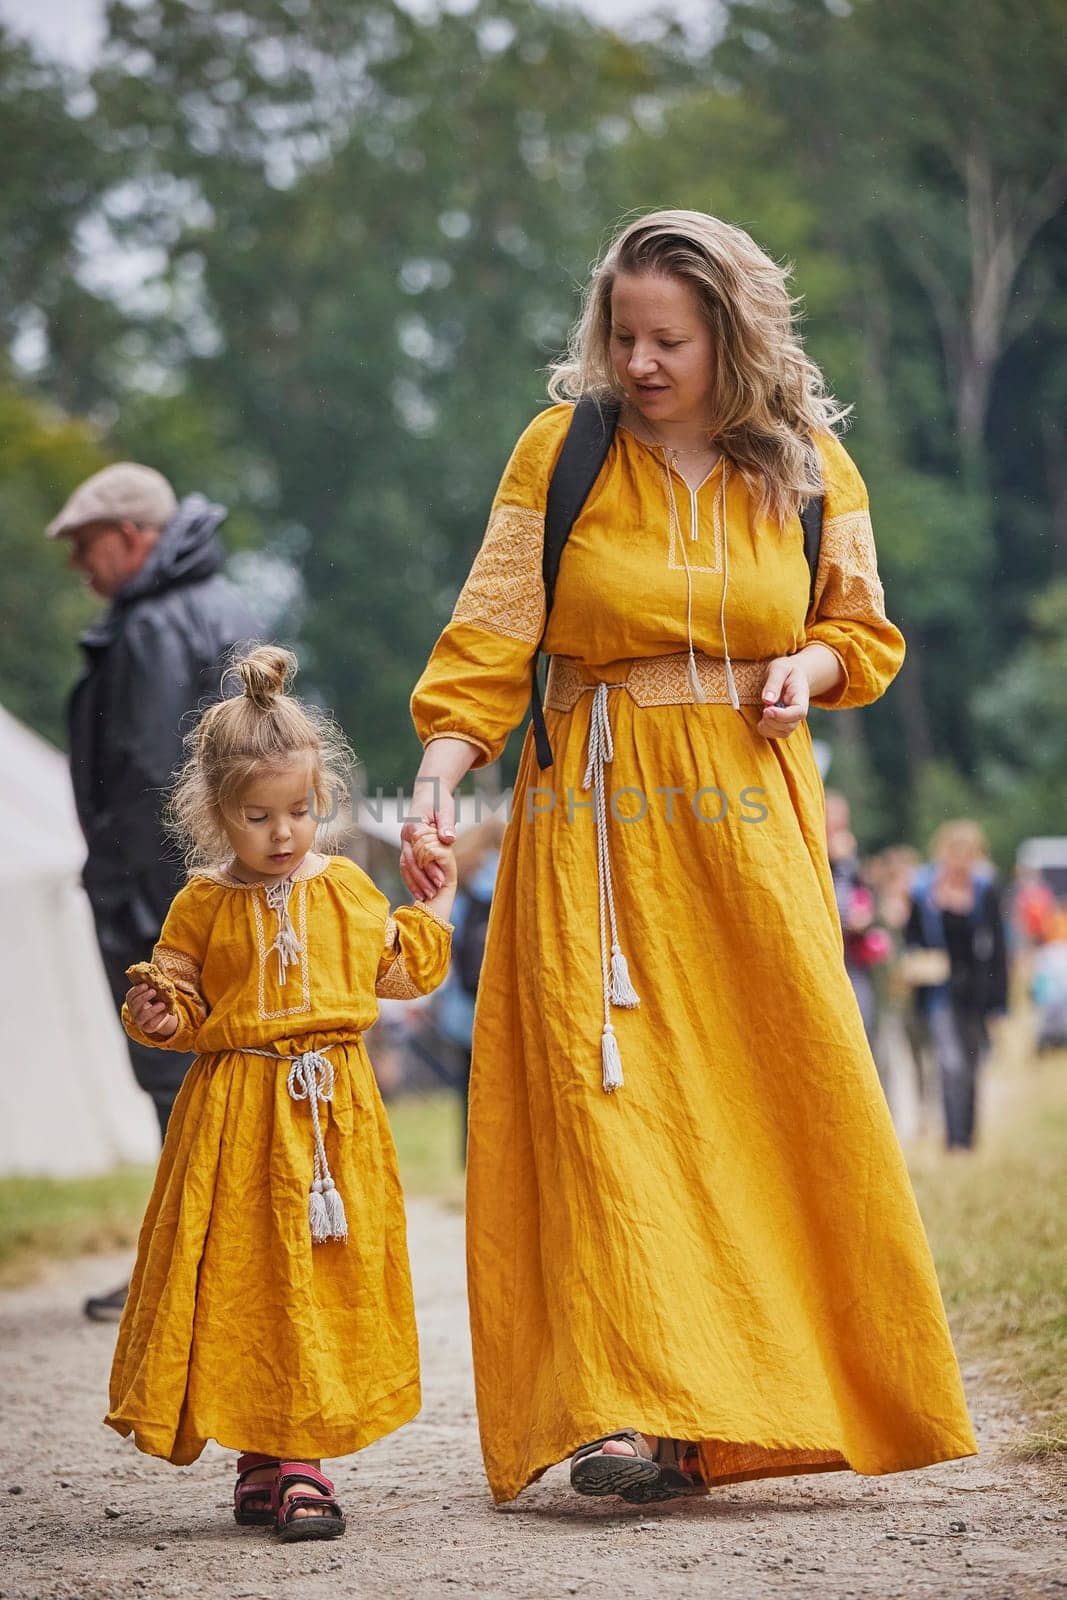 Beautiful woman with her daughter dressed in embroidered dresses by Viktor_Osypenko